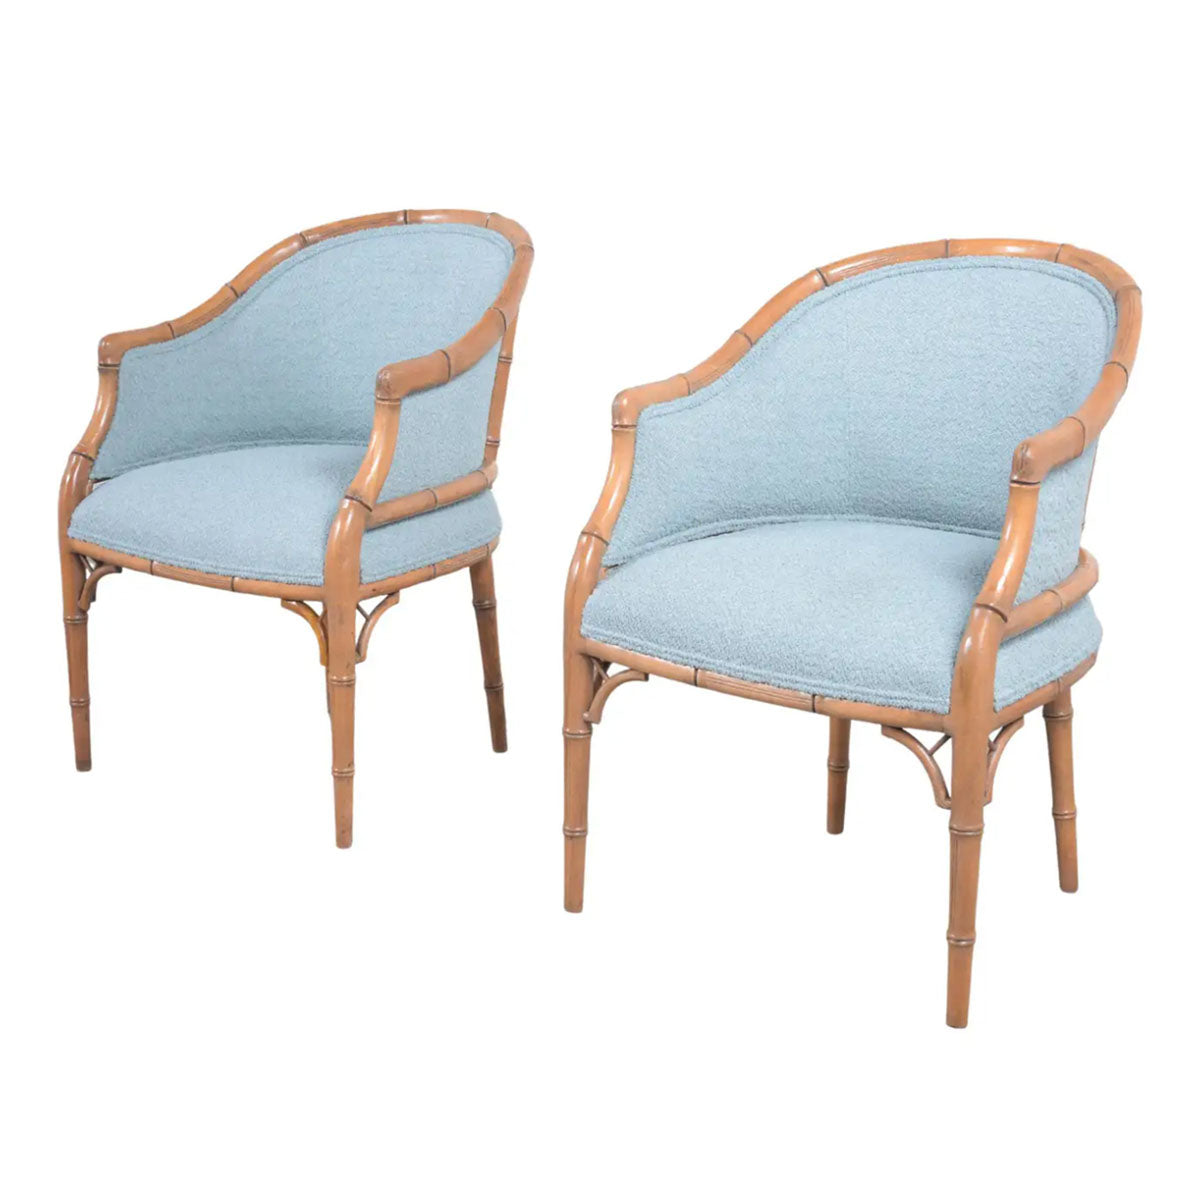 Pair of Faux Bamboo Armchairs - Blue Fabric